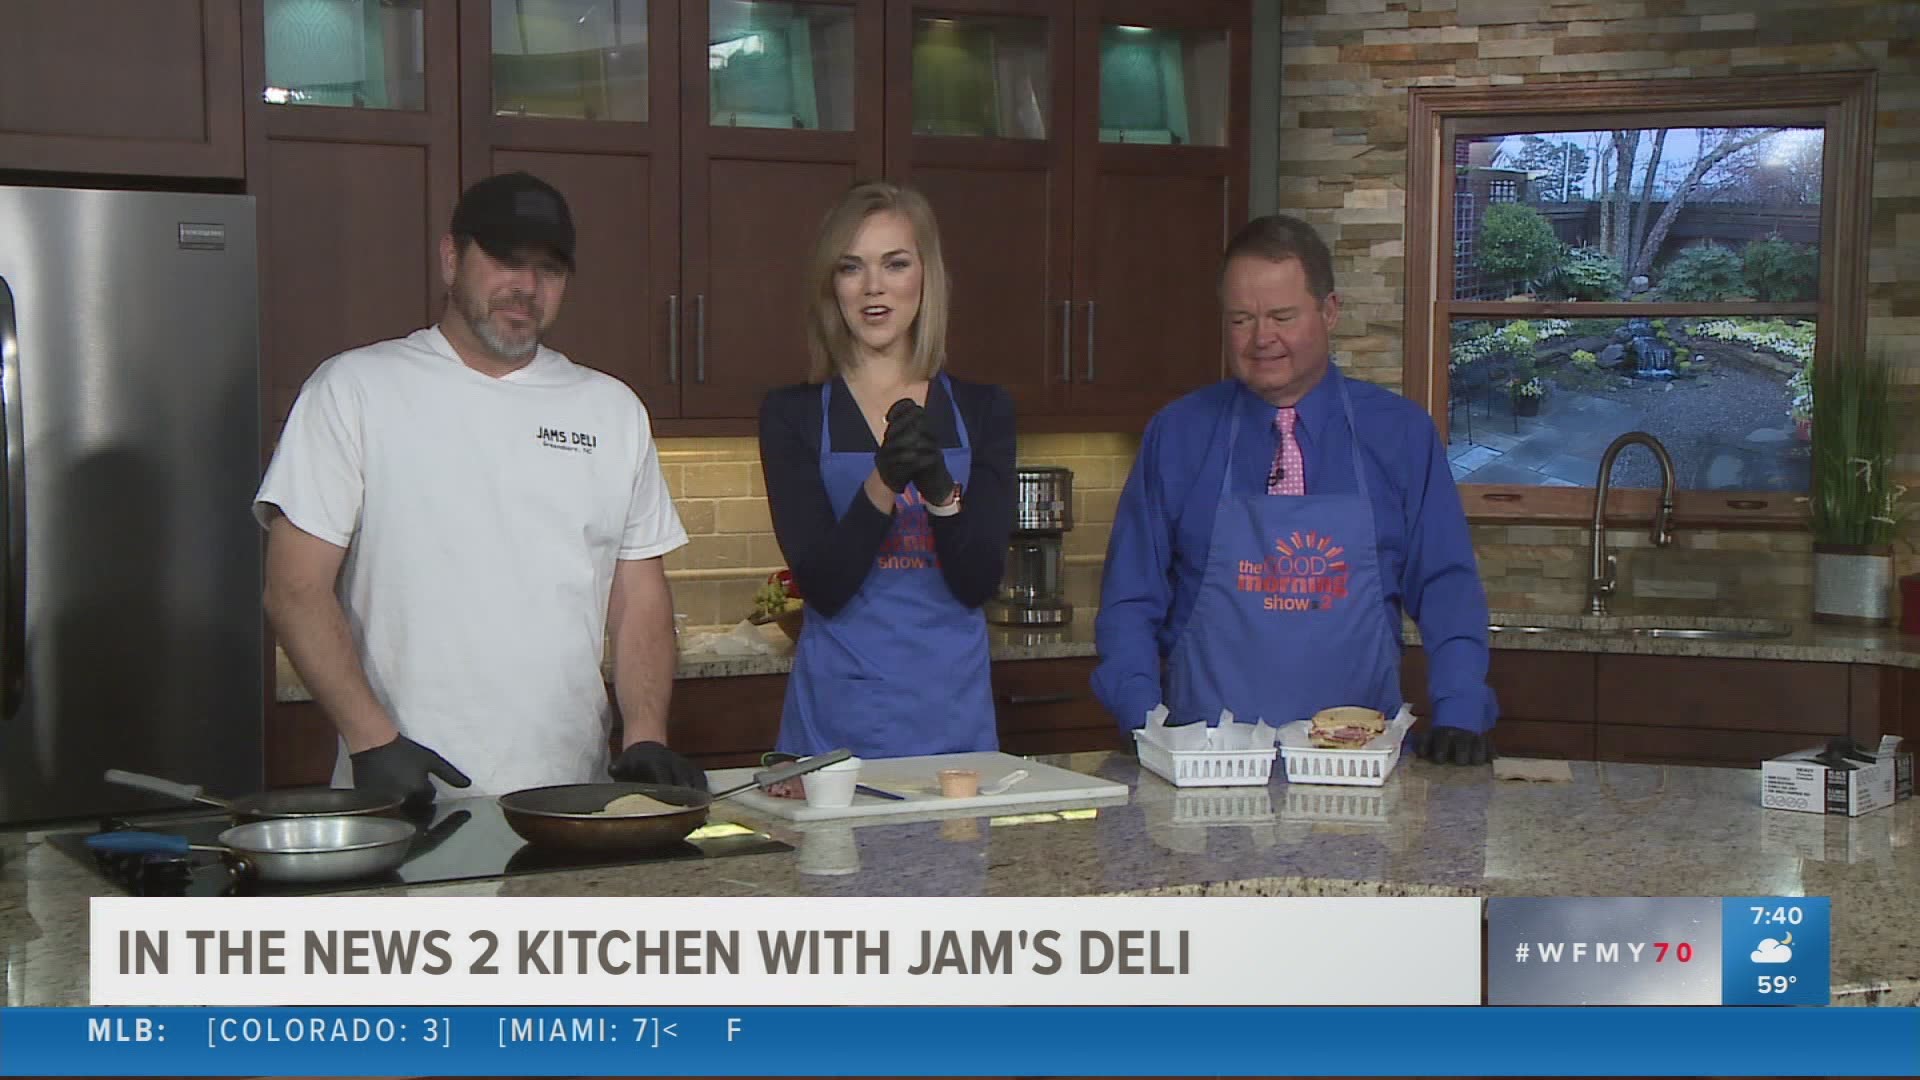 Patrick teaches us quick, easy, and tasty subs to make this weekend!